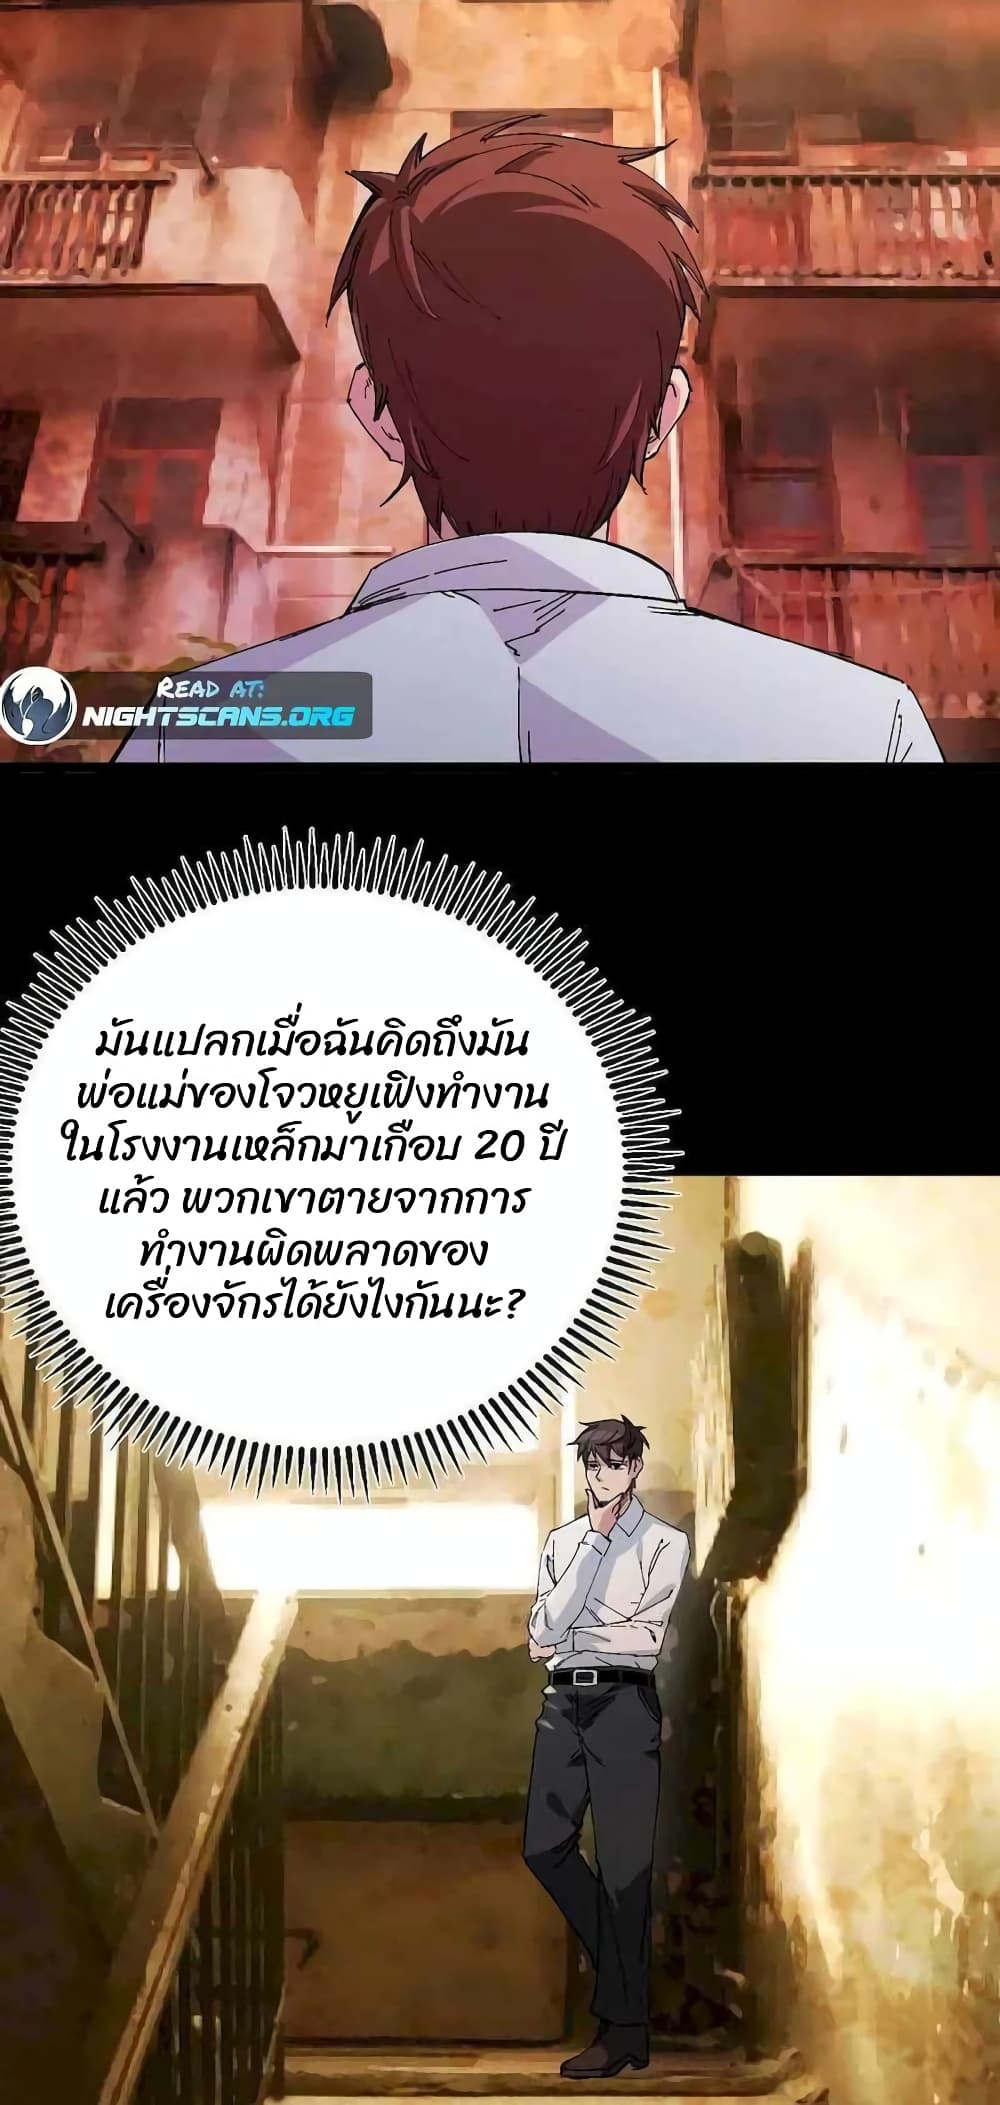 Rebirth Back to 1983 to Be a Millionaire ตอนที่ 2 (4)